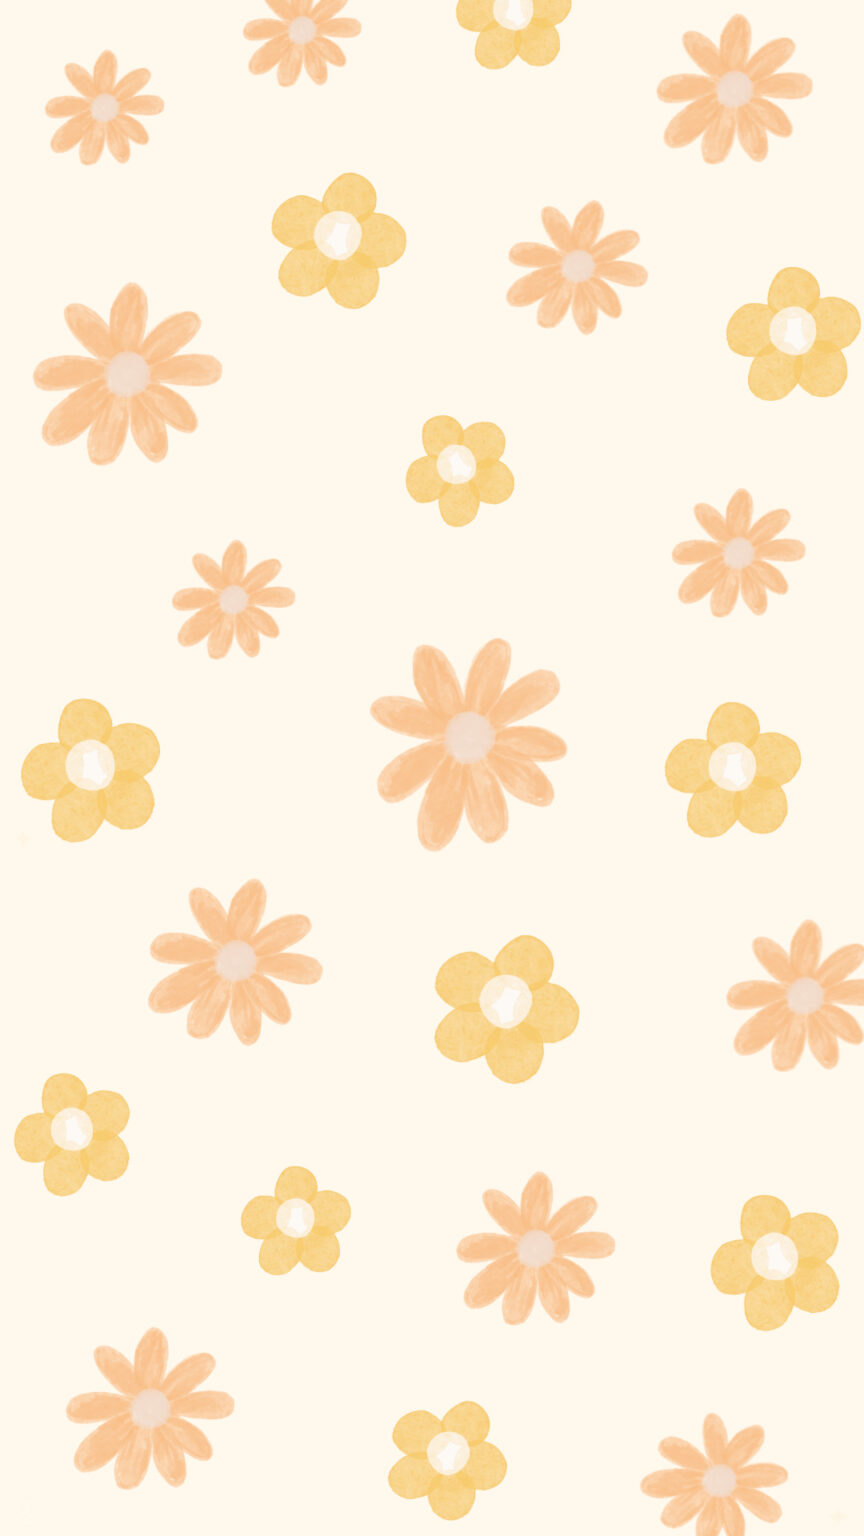 100+ Darling Aesthetic Spring Wallpaper For iPhone (Free Download)